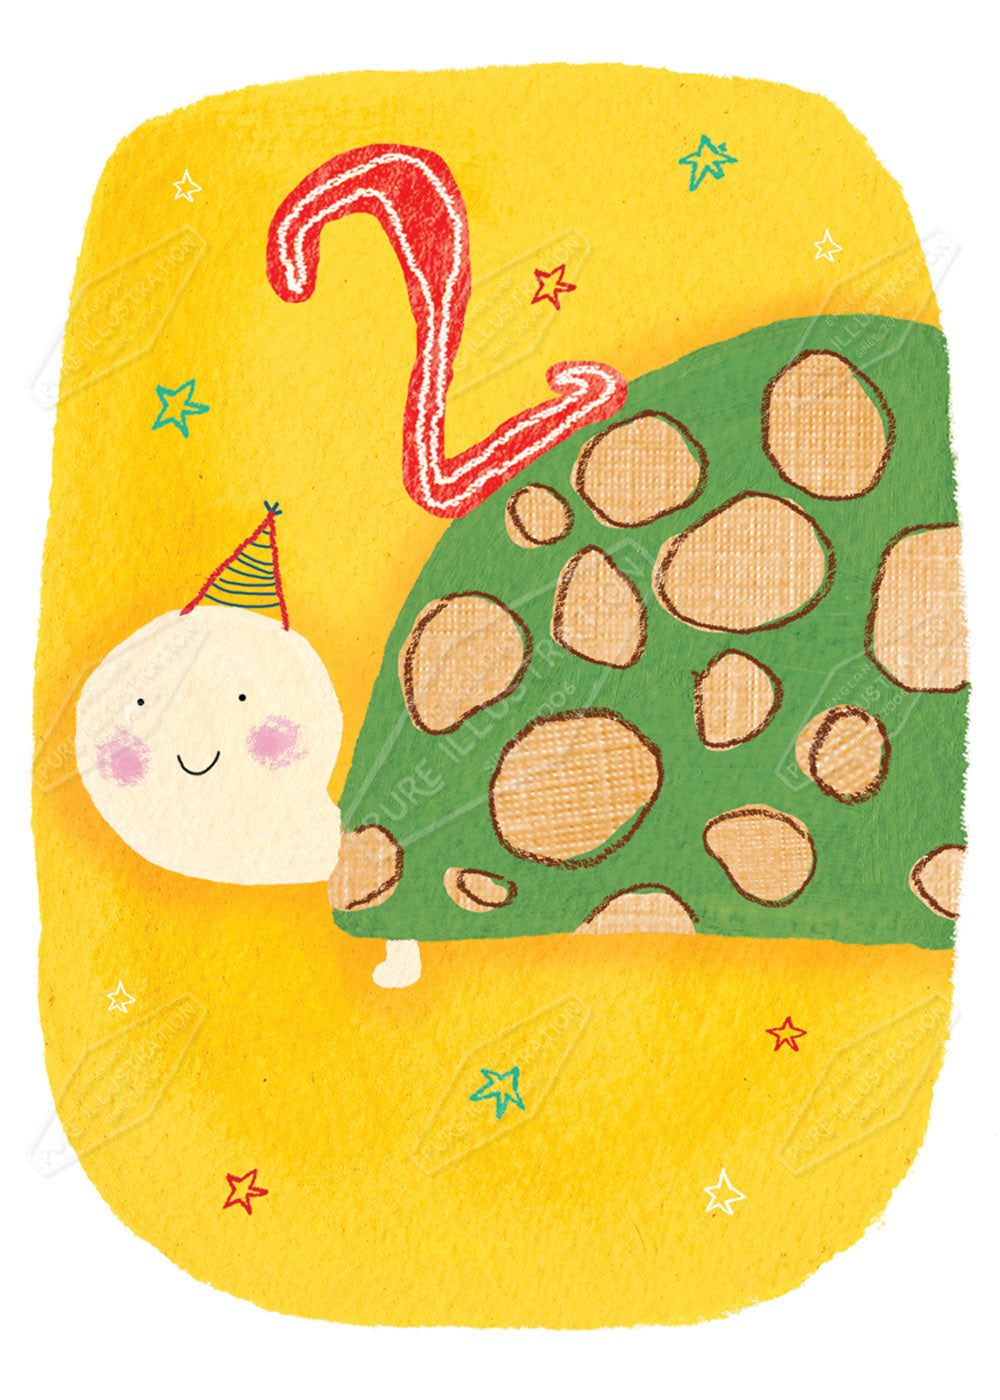 Birthday Tortoise Age Card - Greeting Card Design by Cory Reid for Pure Art Licensing Agency